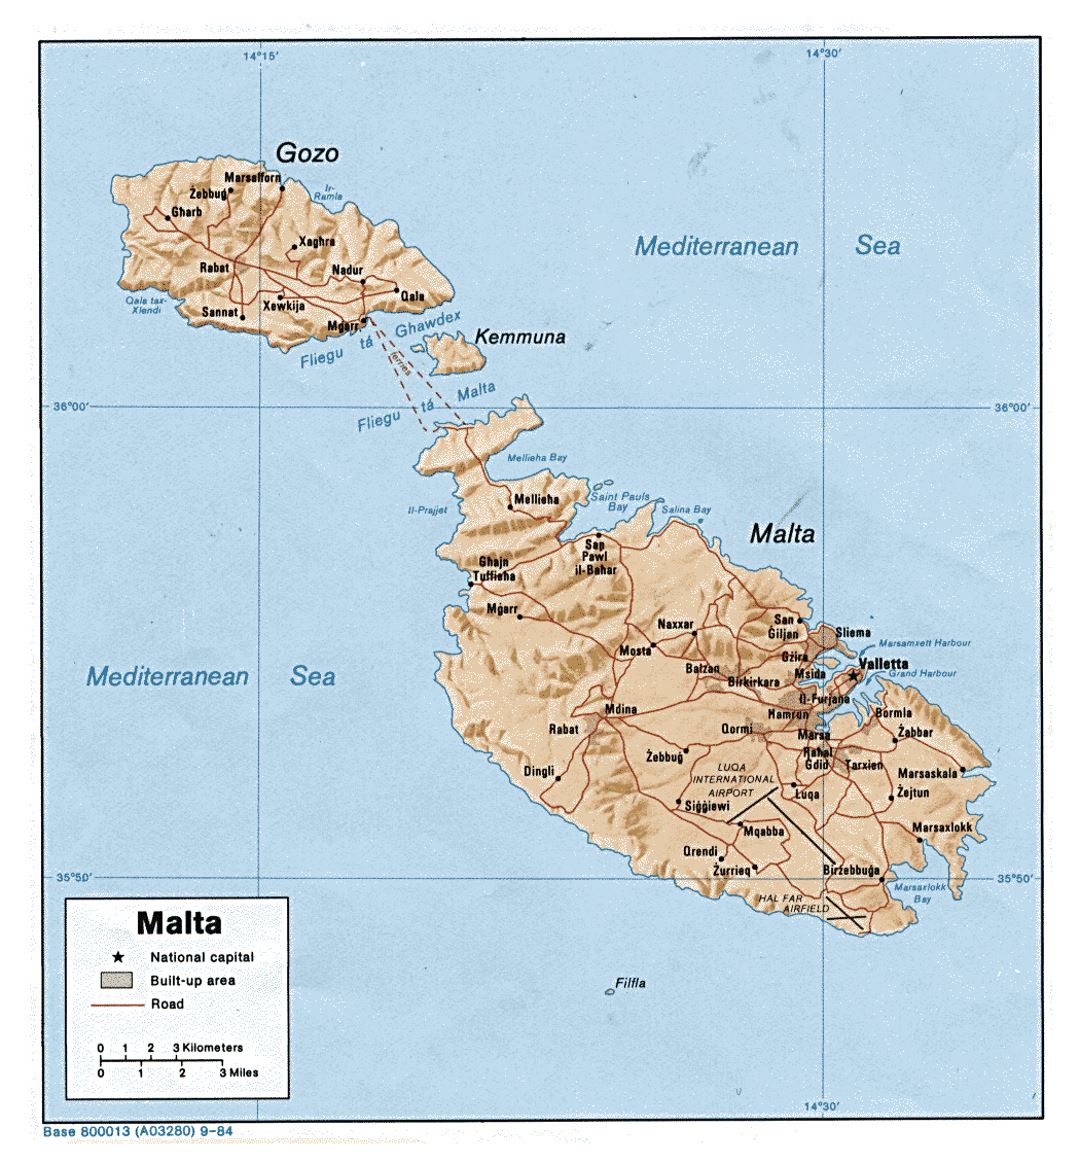 Detailed political map of Malta with relief, roads, cities and villages - 1984